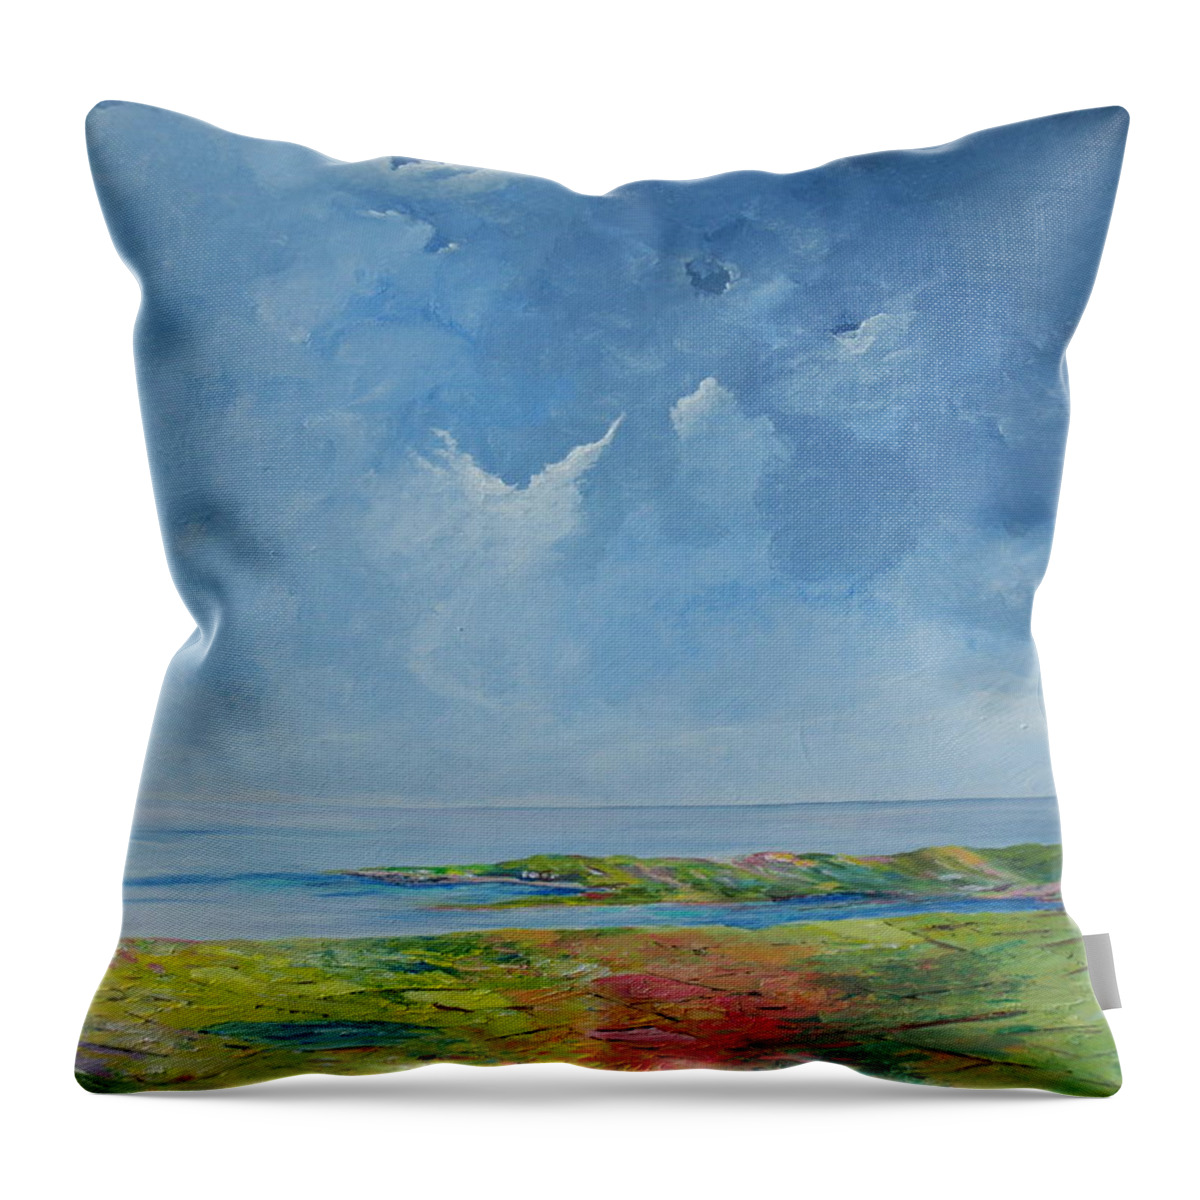 Palette Of Ireland Throw Pillow featuring the painting The Palette of Ireland by Conor Murphy